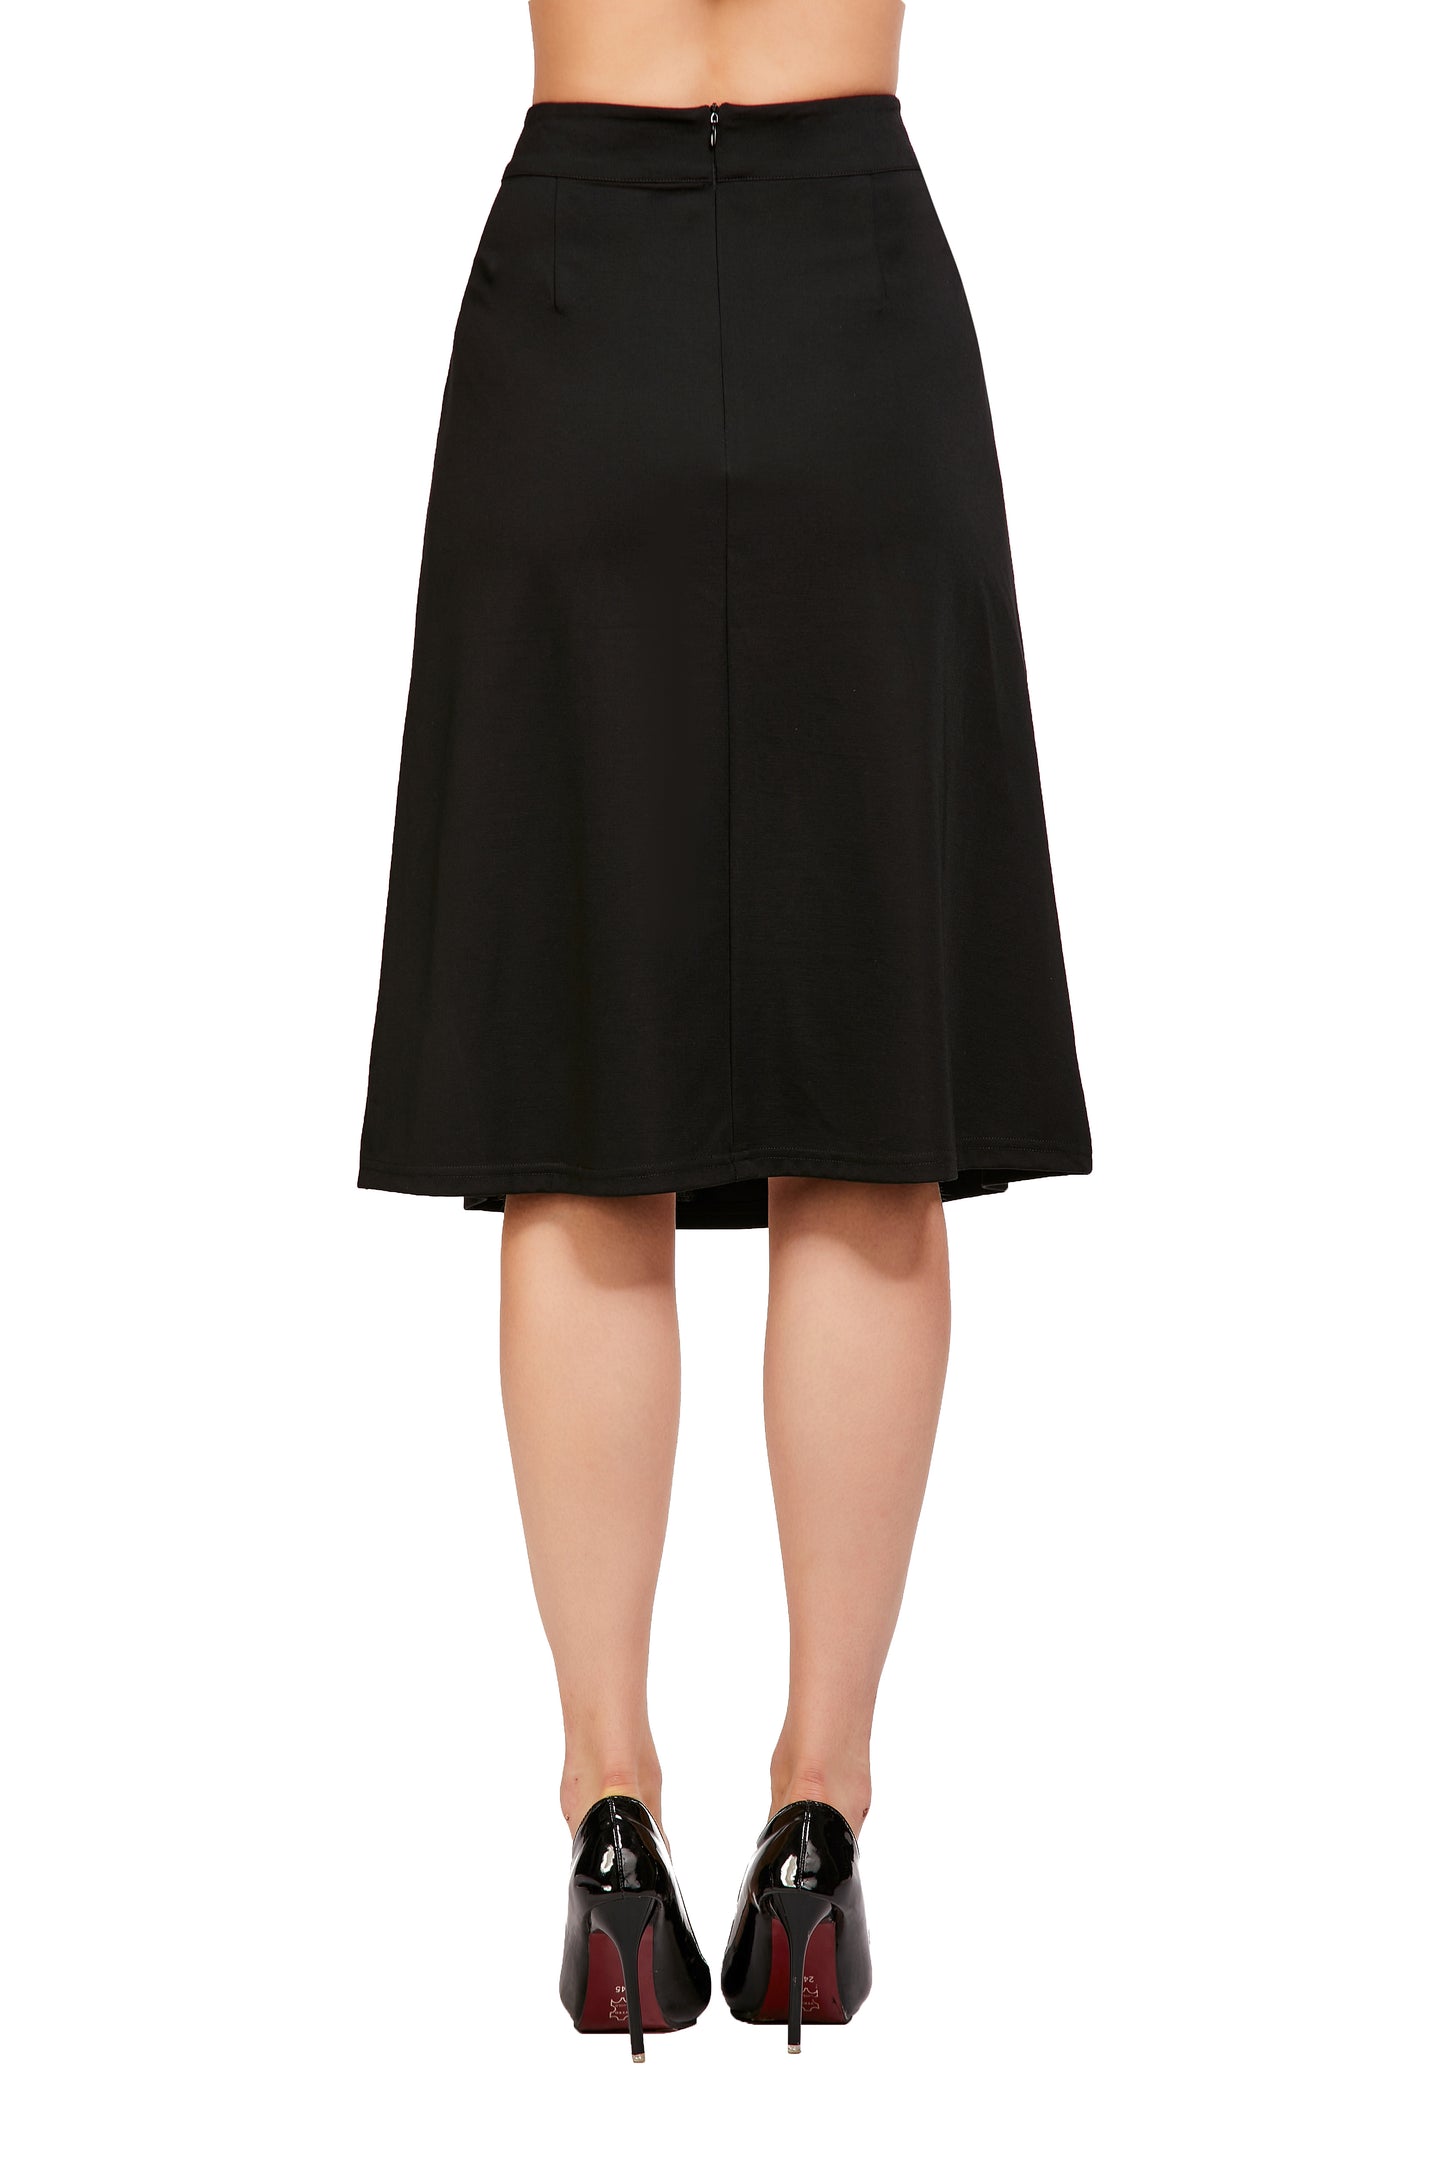 Fully Lined 27" A-Line Skirt - seilerlanguageservices